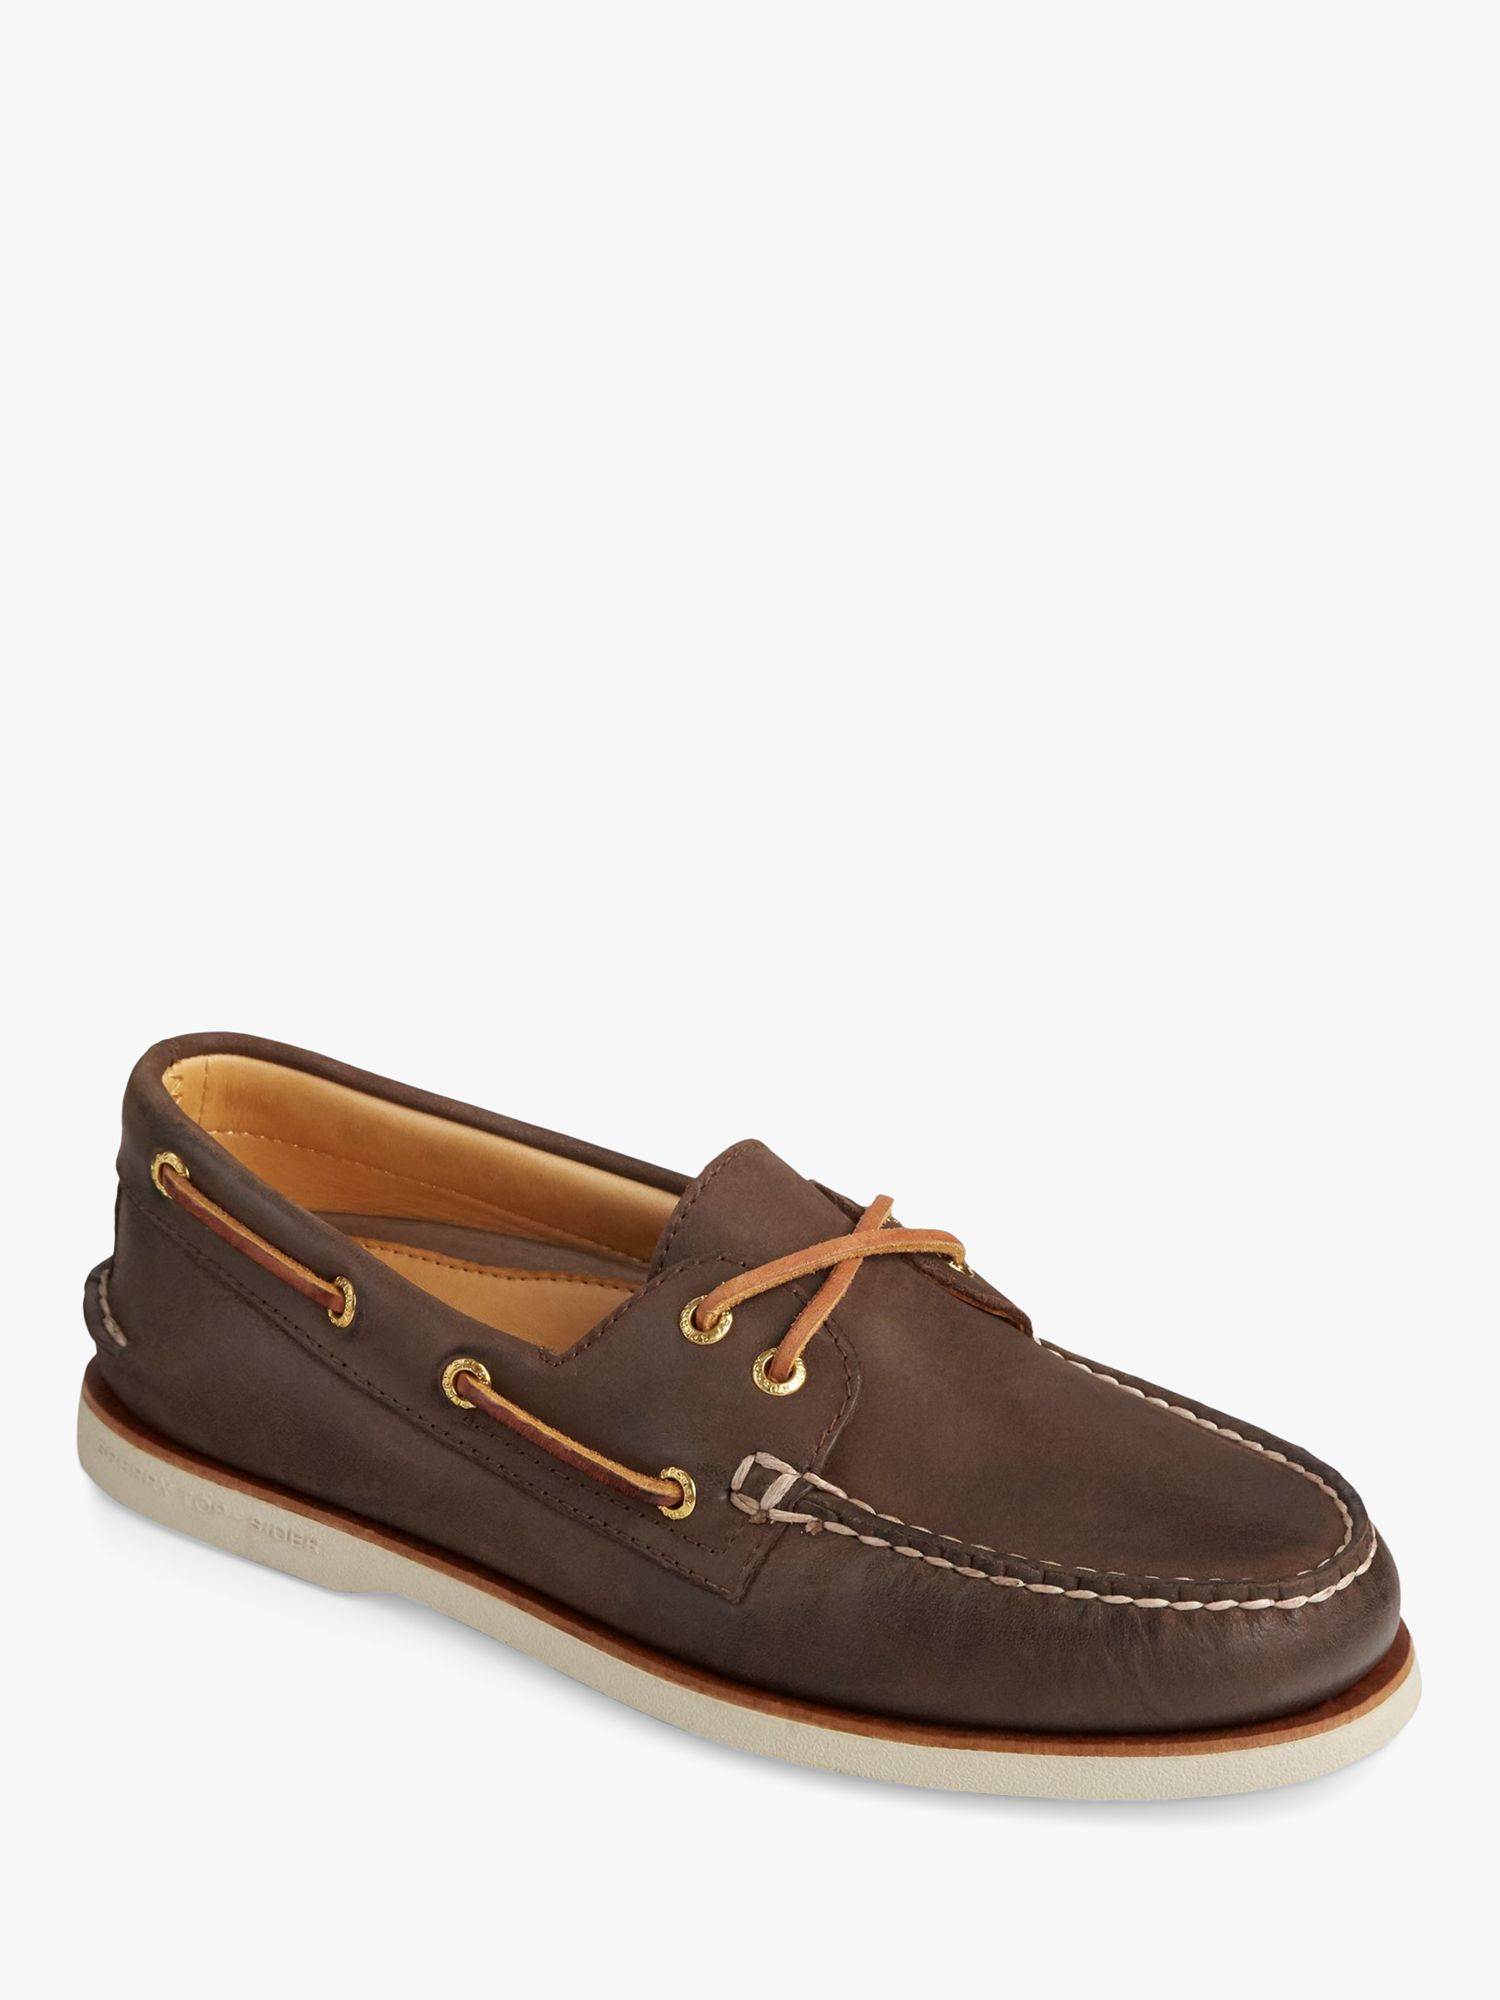 Buy Sperry Gold Cup Authentic Original Leather Boat Shoes Online at johnlewis.com